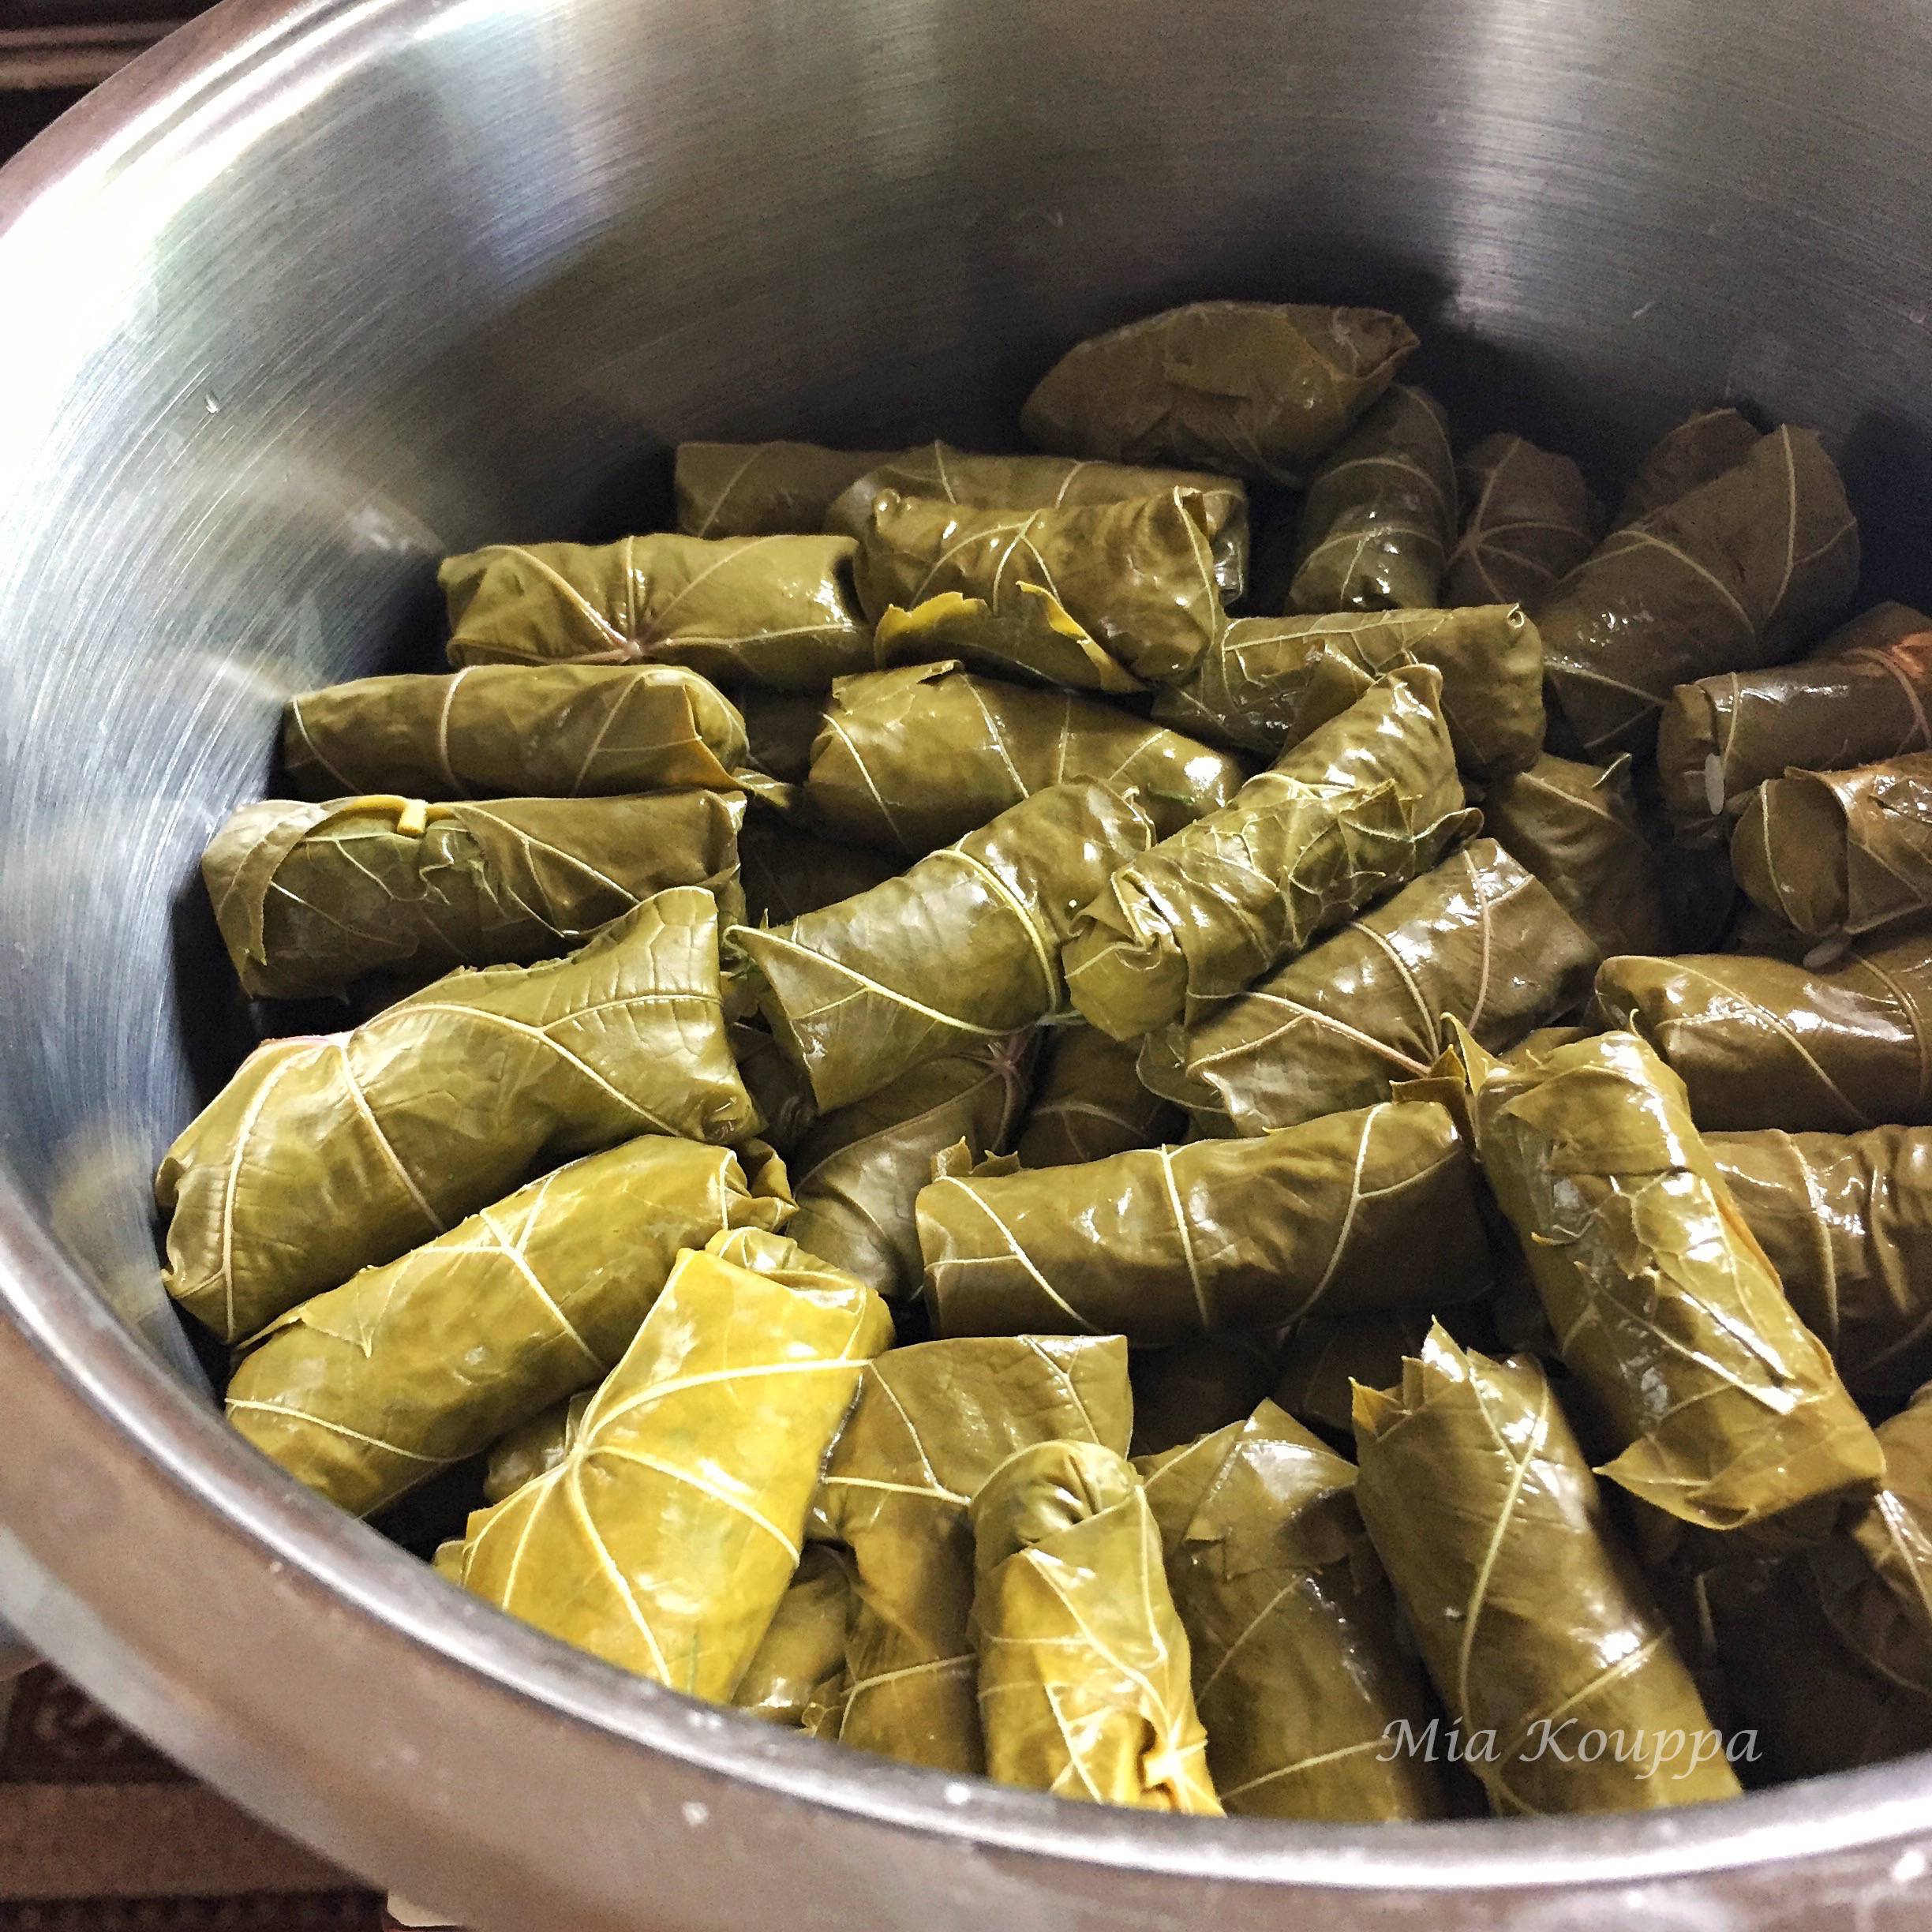 Greek dolmades. A mixture of rice and herbs wrapped in vine or grape leaves. A traditional and delicious Greek recipe.